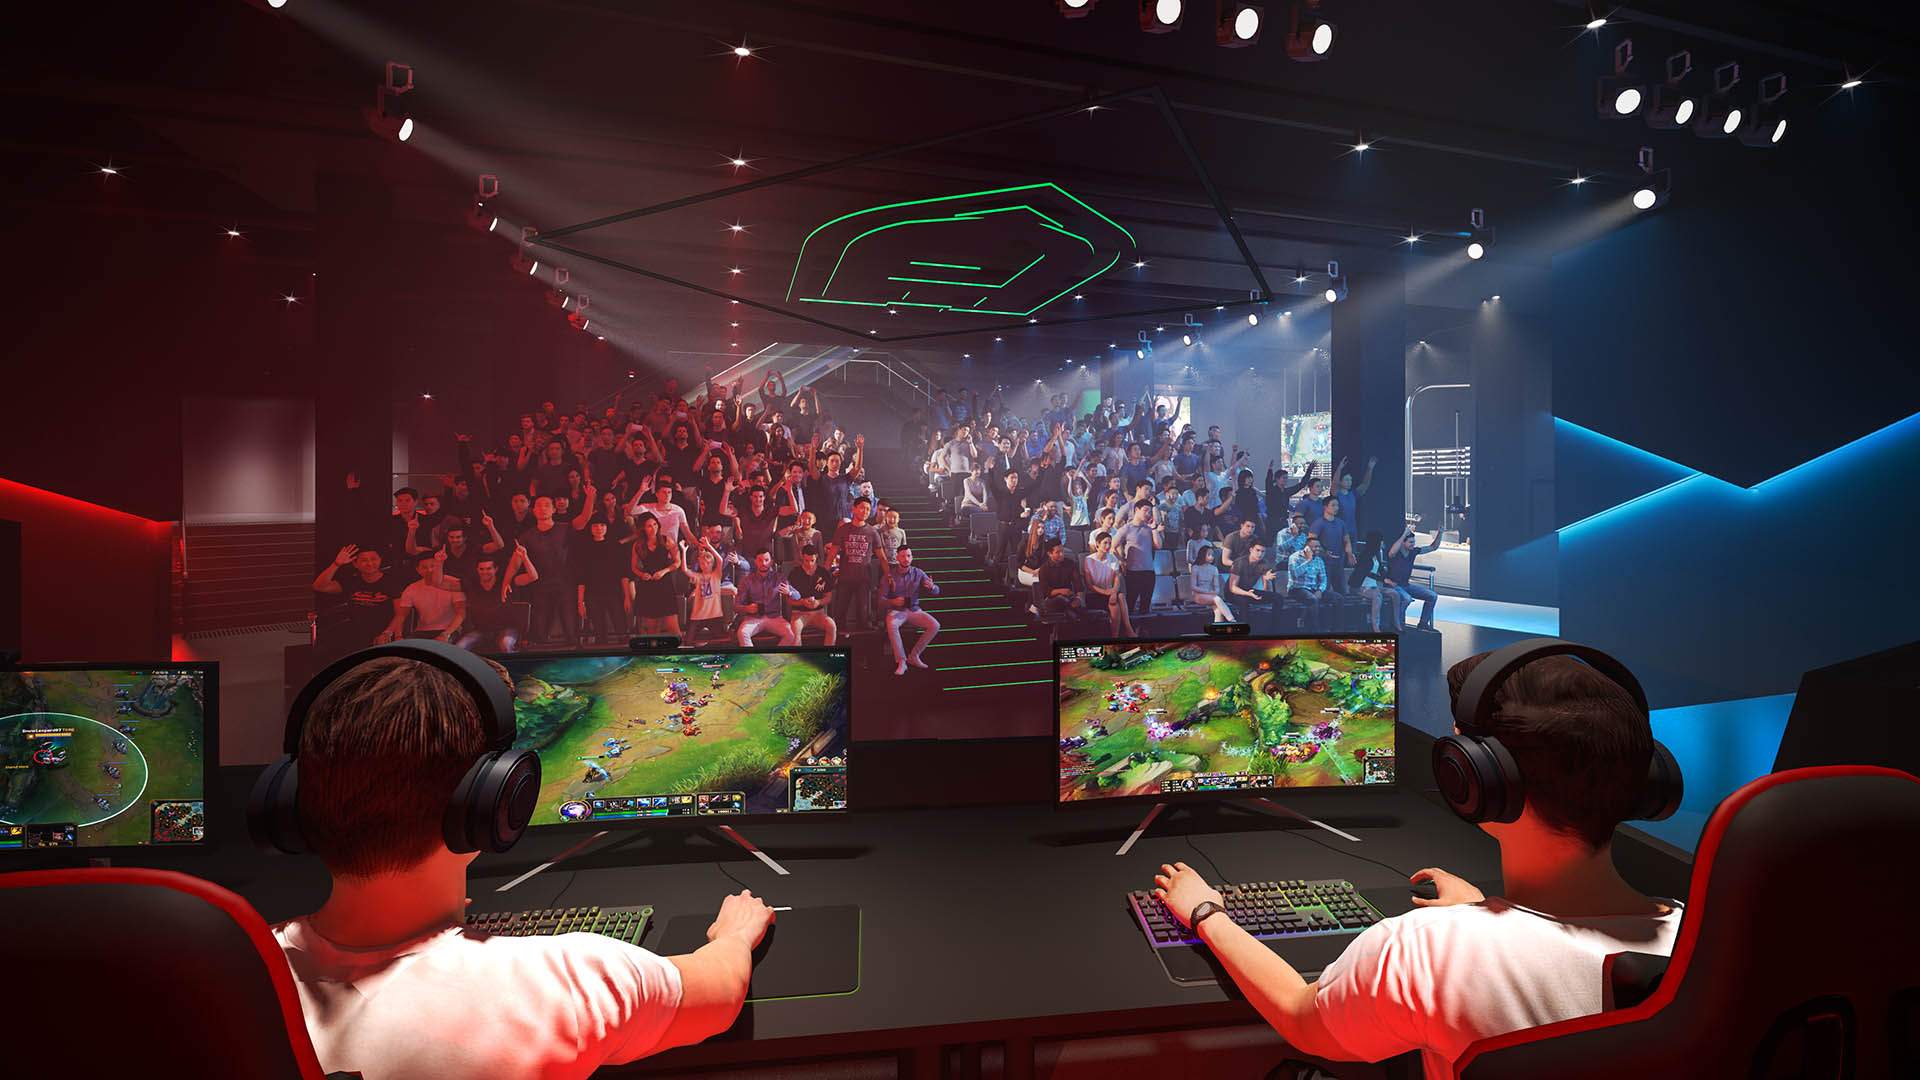 Melbourne Will Soon Be Home to Australia's Largest Video Gaming and Esports Venue